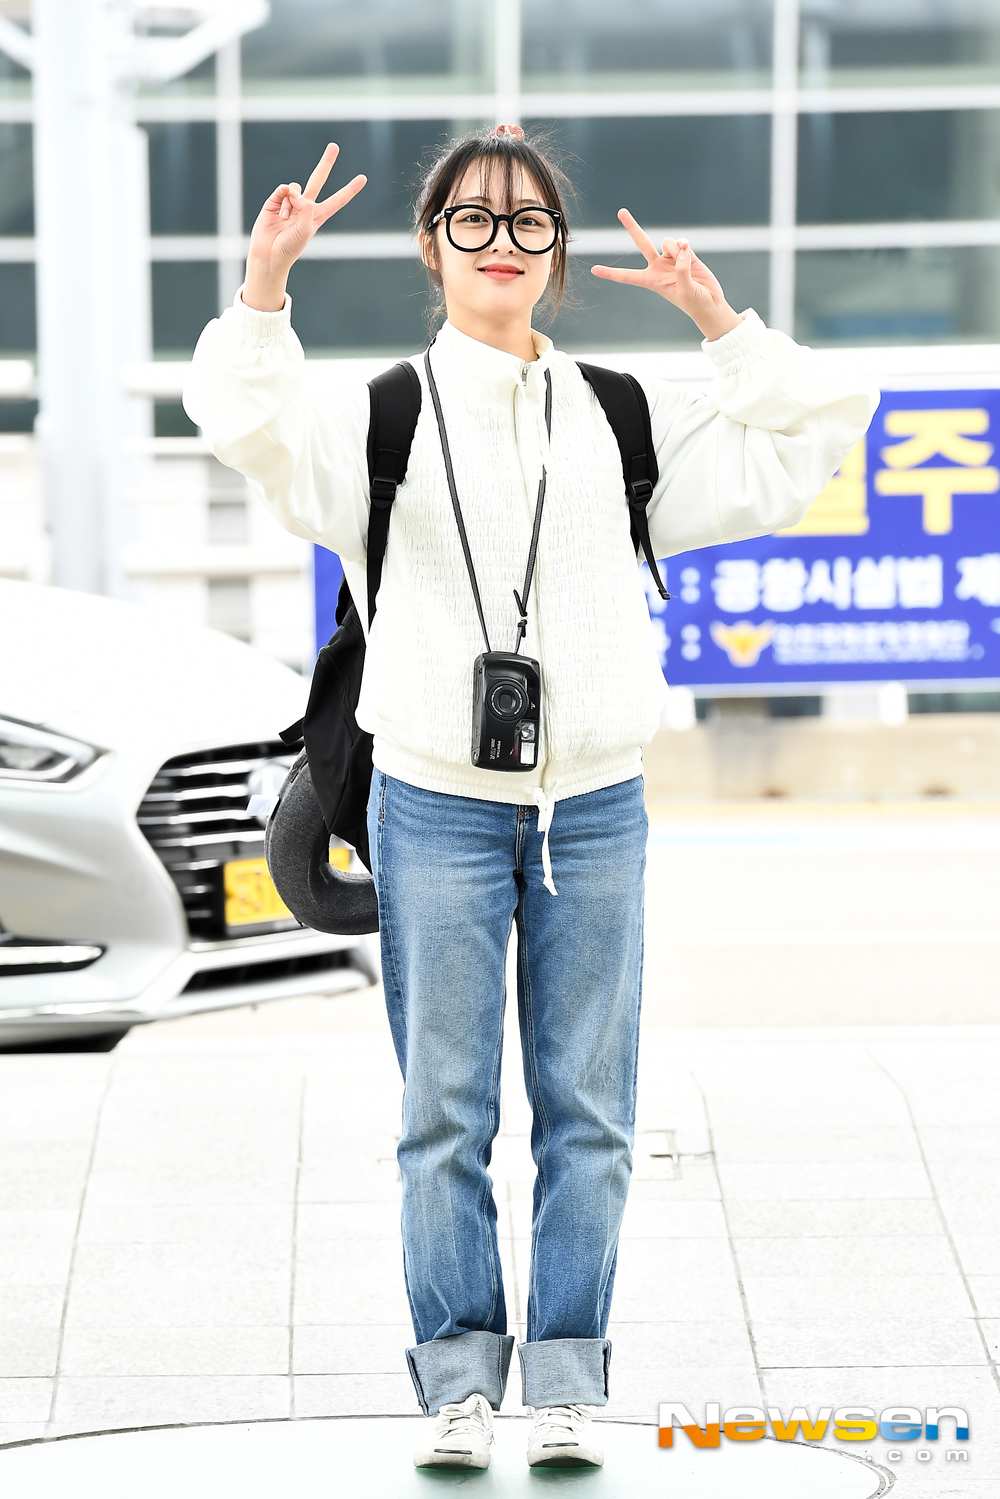 Actor Kim Bo-ra left for Phuket, Thailand, on a vacation for the JTBC gilt drama SKY Castle through Incheon International Airport in Unseo-dong, Jung-gu, Incheon on the afternoon of February 10.Actor Kim Bo-ra is leaving for Phuket, Thailand, showing off his airport fashion.exponential earthquake